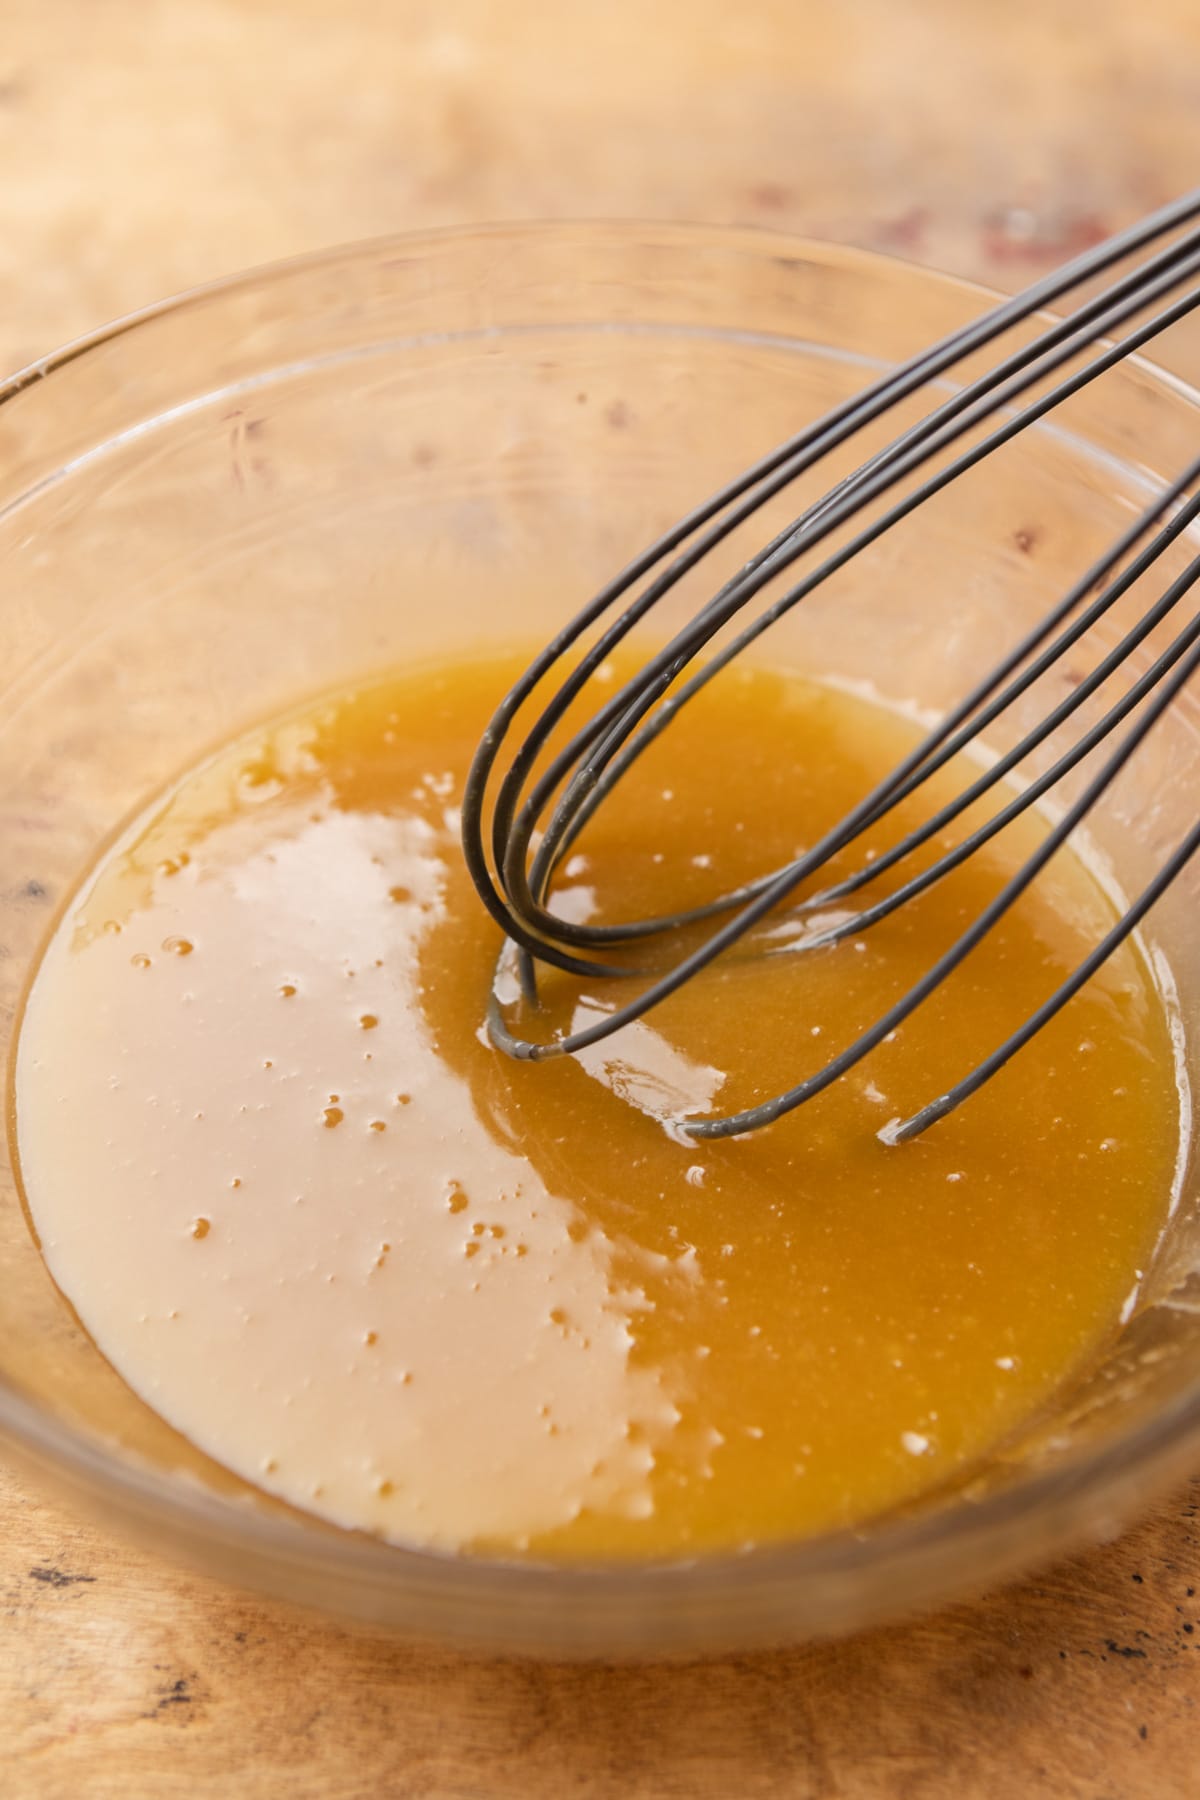 Sugars and eggs being whisked together in a bowl.